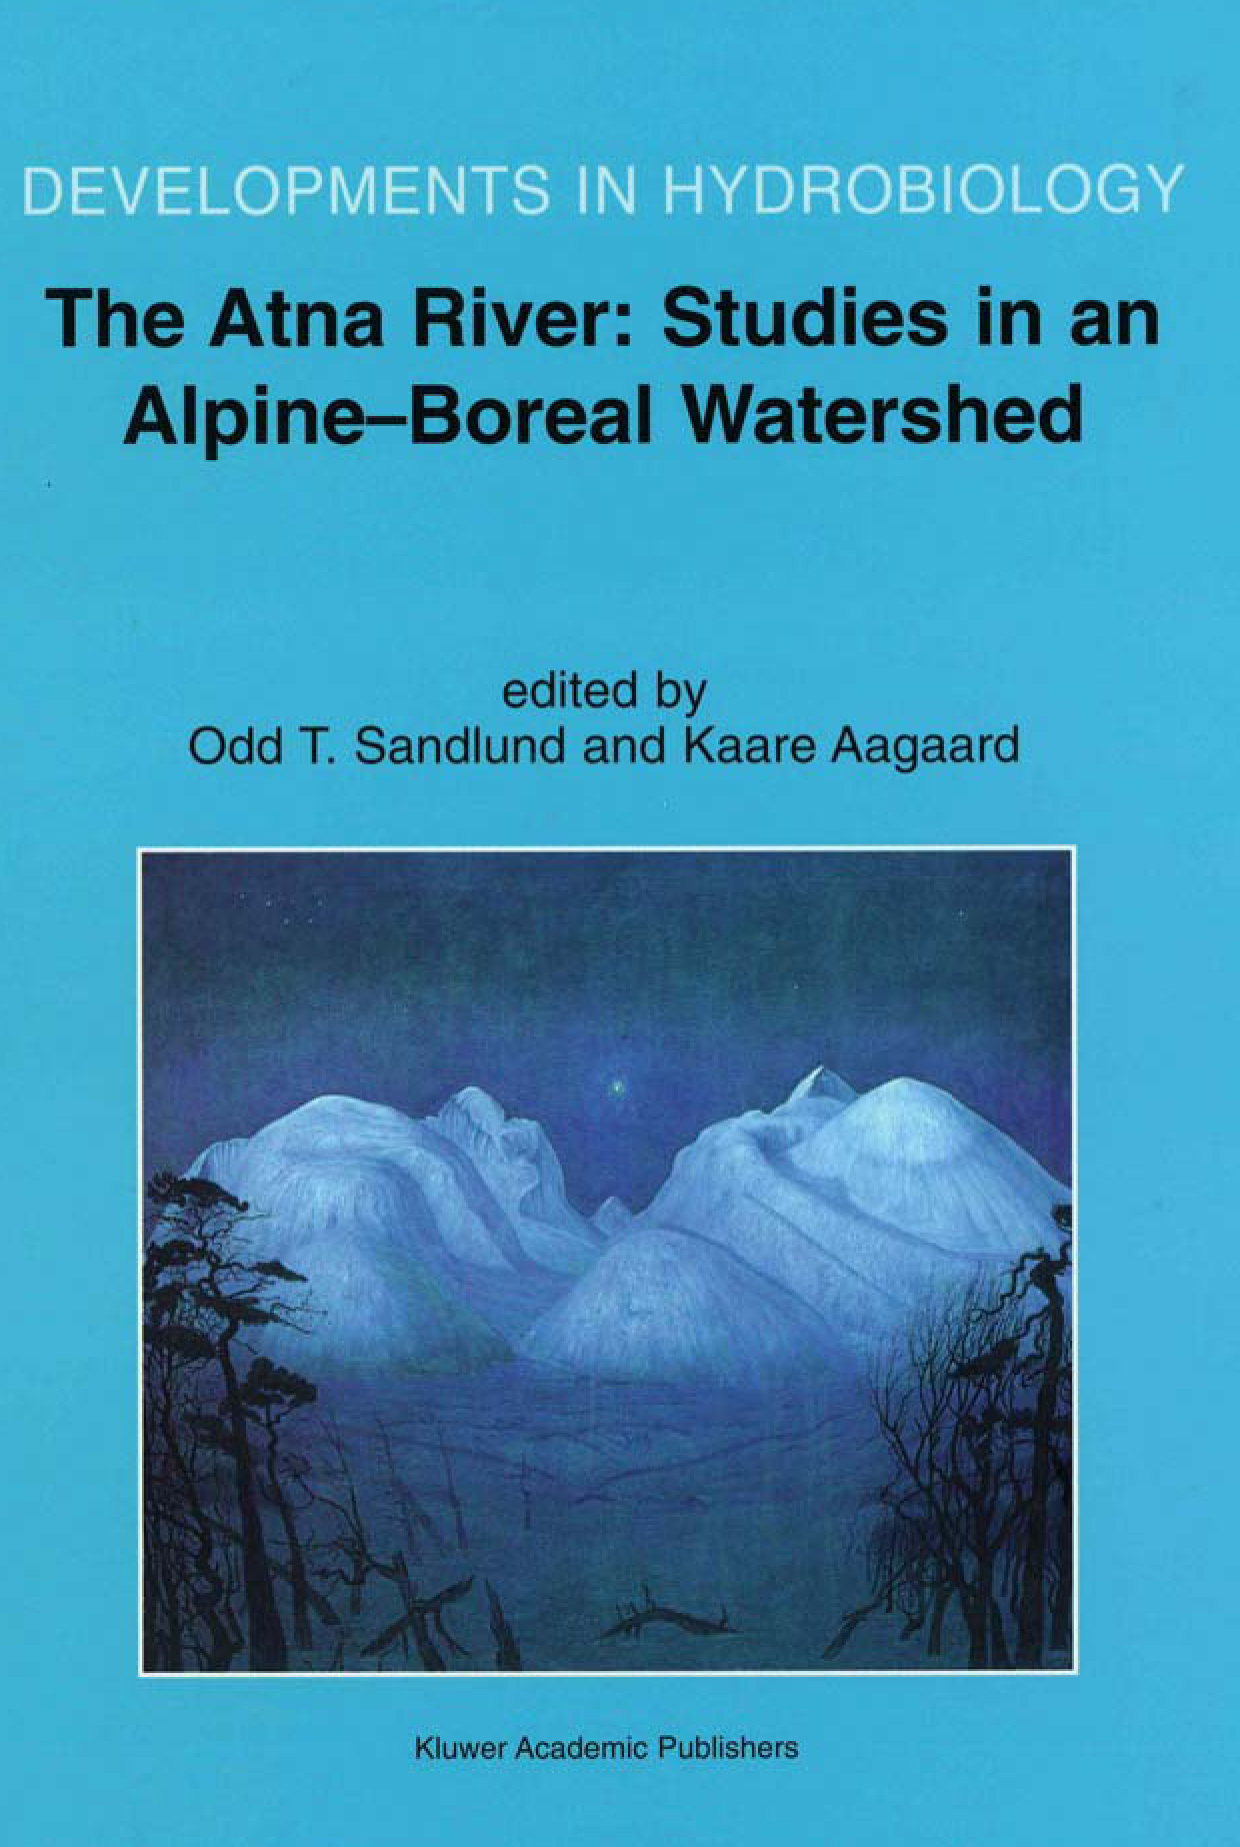 The Atna River: Studies in an Alpine-Boreal Watershed